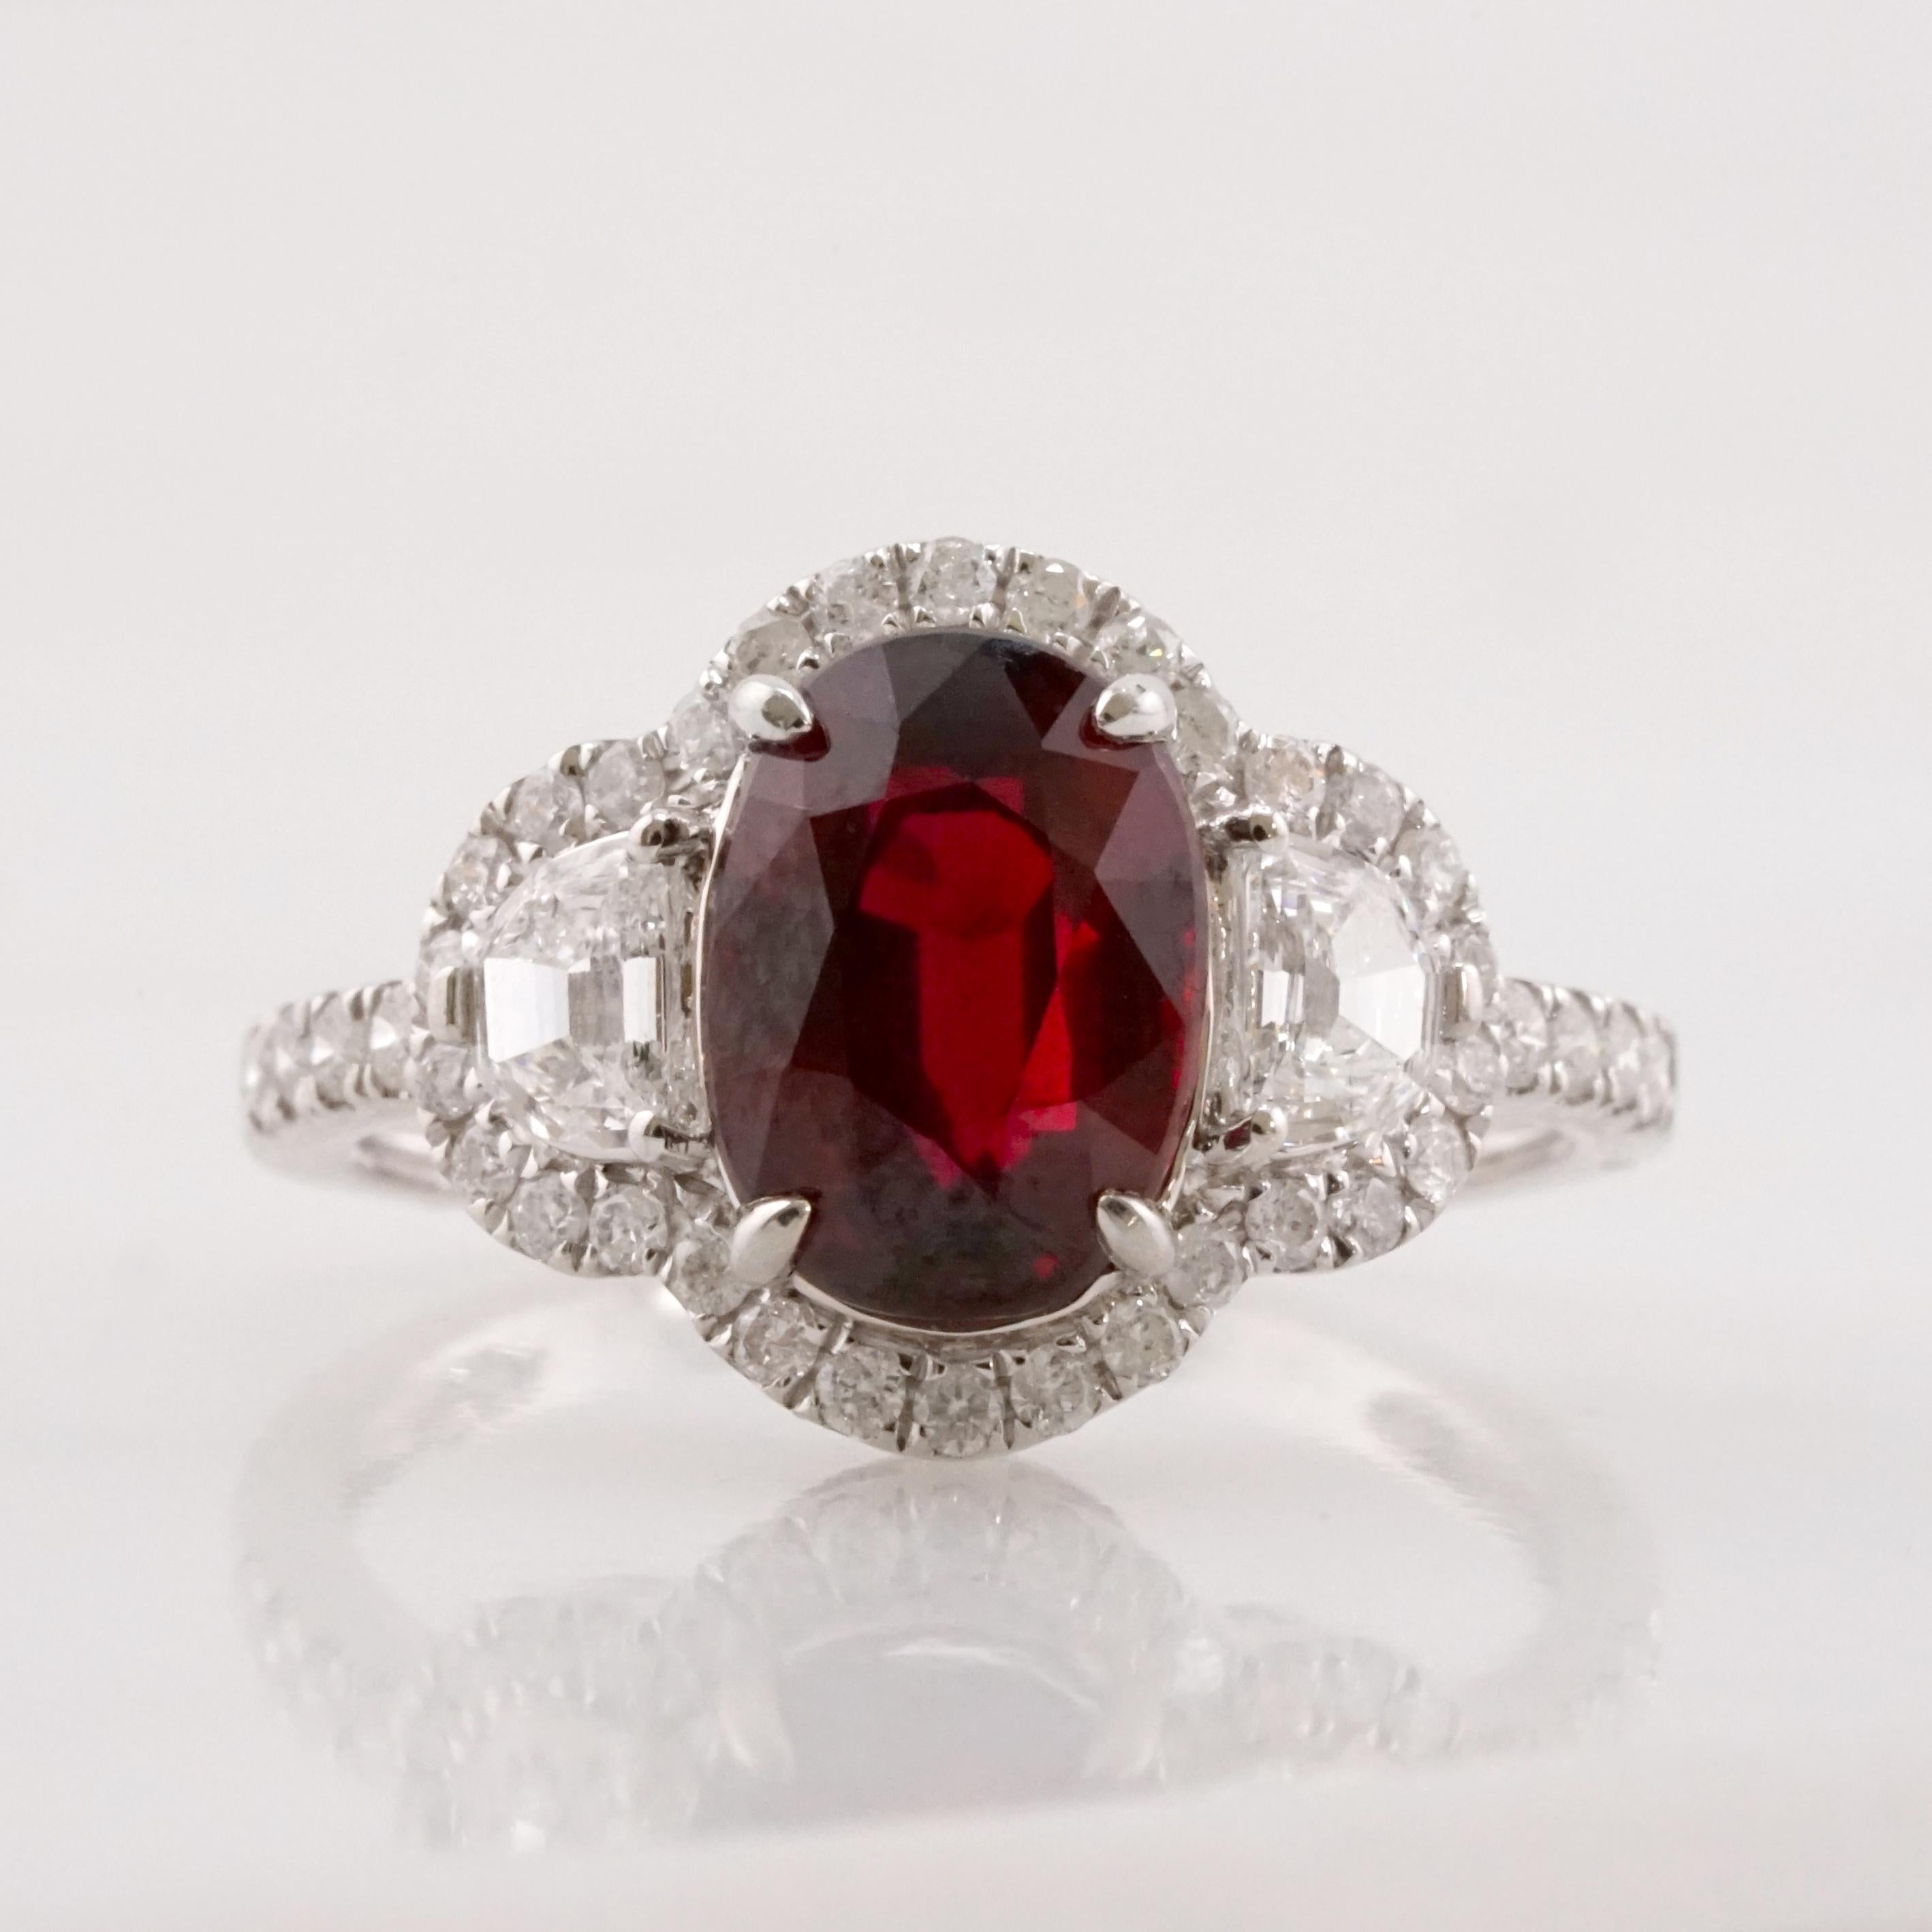 This Antinori Di Sanpietro creation is a luxurious display of craftsmanship and beauty. 

It features a stunning GRS Certified 3.04-carat oval unheated ruby, its vibrant deep red hue capturing the essence of sophistication. 

The ruby, sourced from